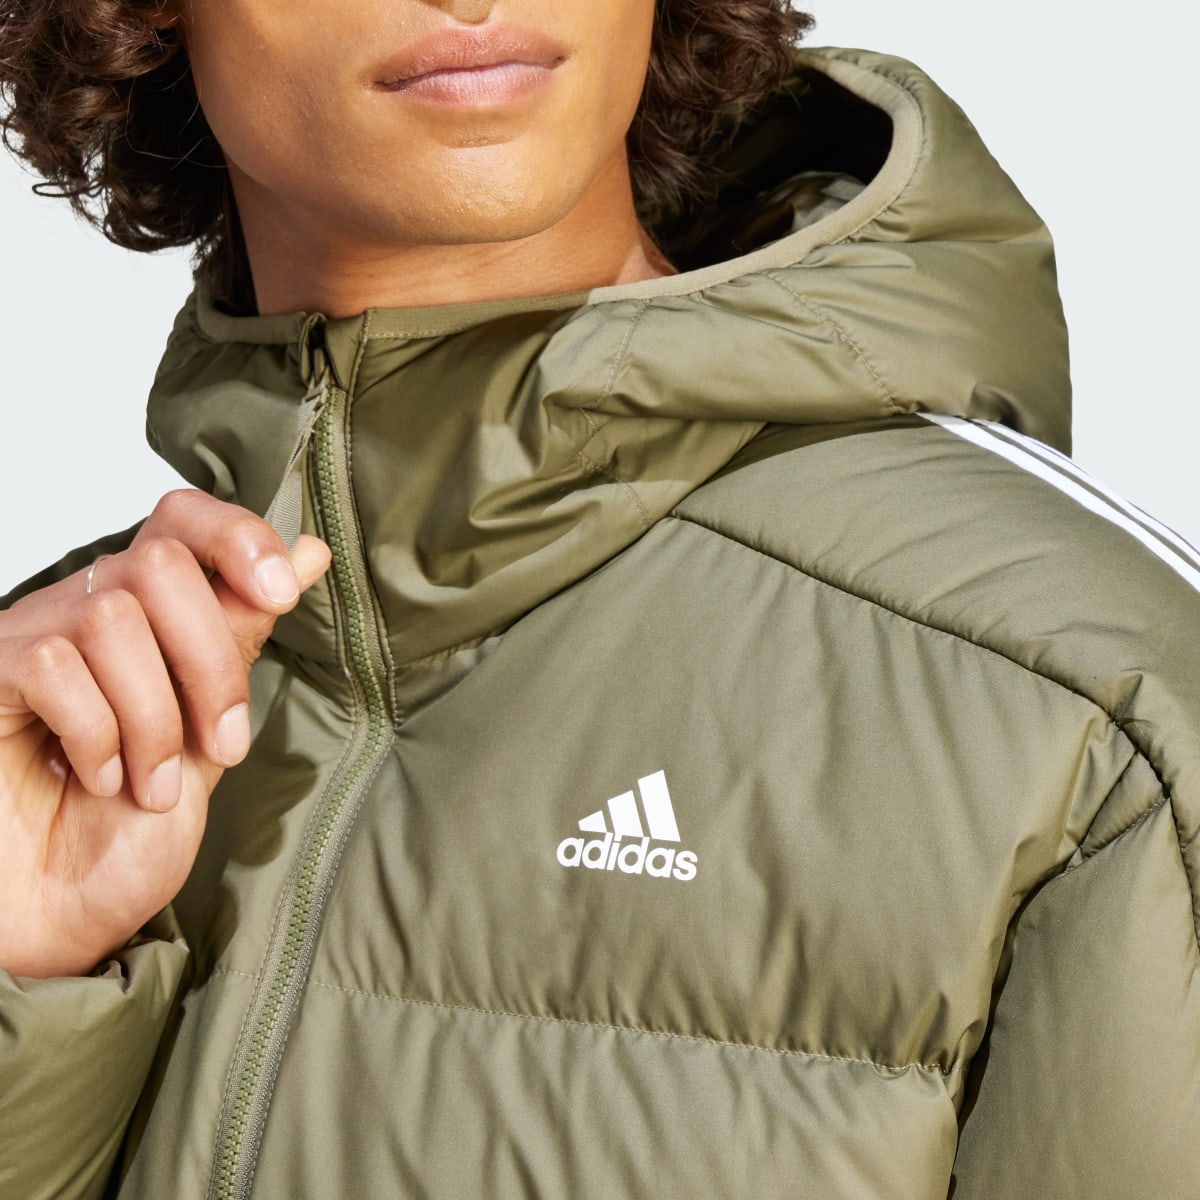 Adidas Essentials Midweight Down Hooded Jacket. 6